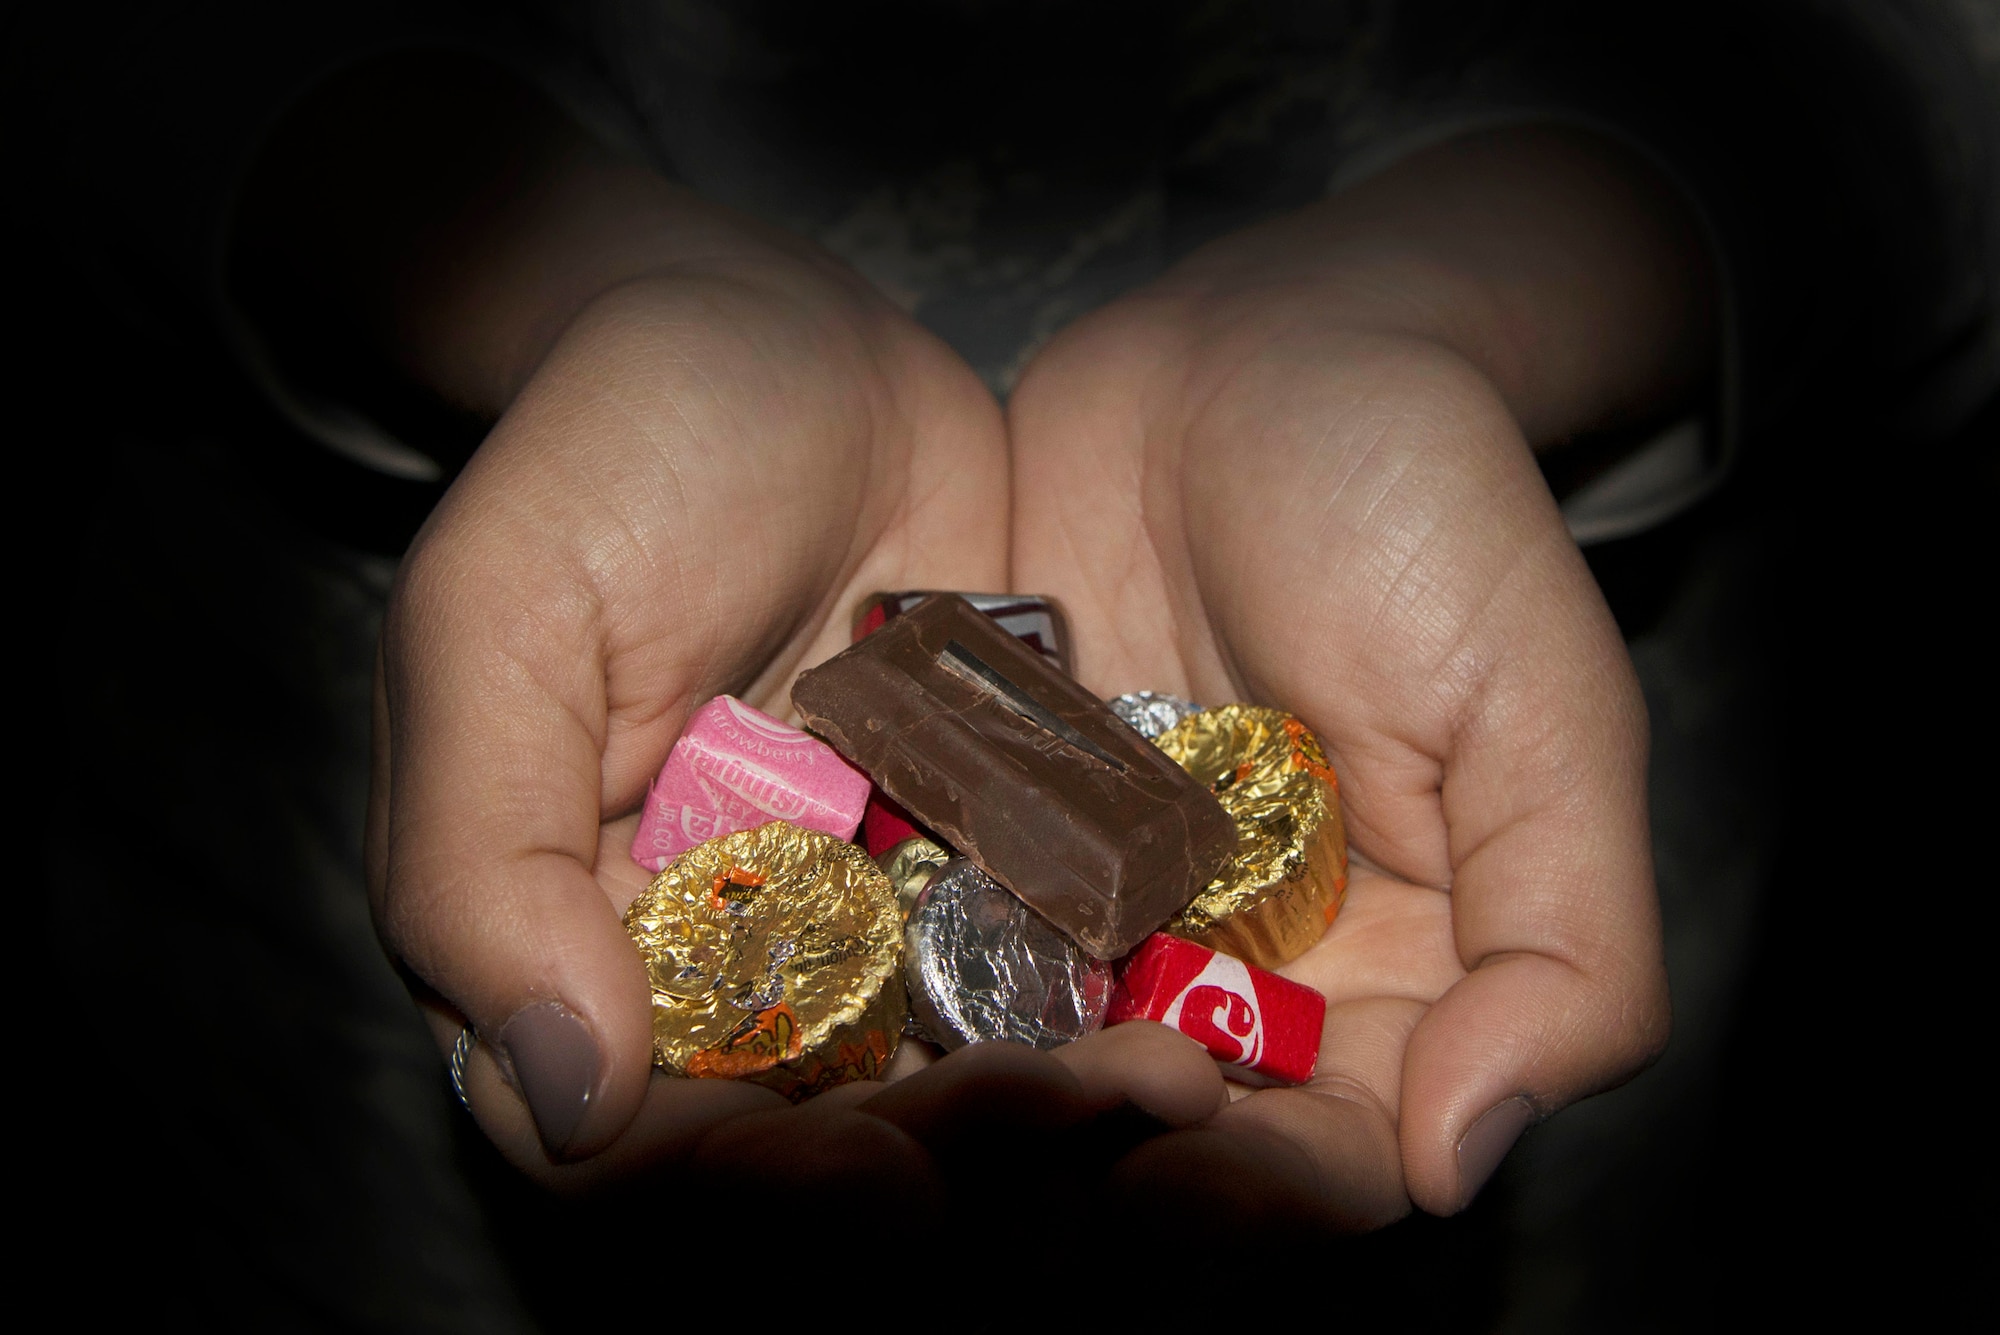 Parents and adults should inspect any treats given by a stranger, according to the American Academy of Pediatrics. Always check to see if the candy is outdated, spoiled or tampered with to keep children safe, and never eat unwrapped candy.